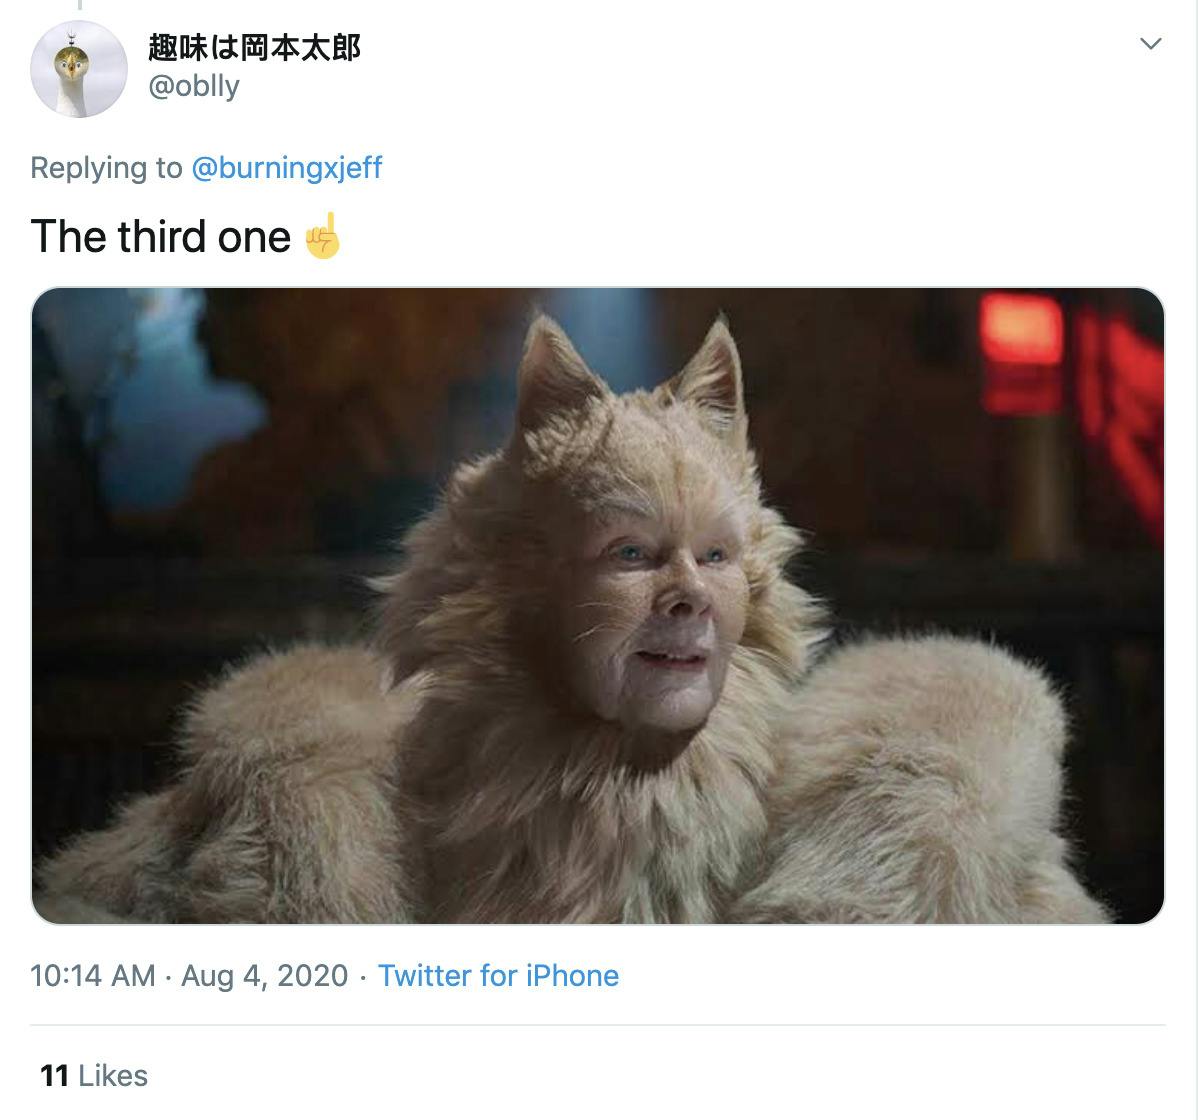 "The third one☝️" image of Judy Dench from Cats